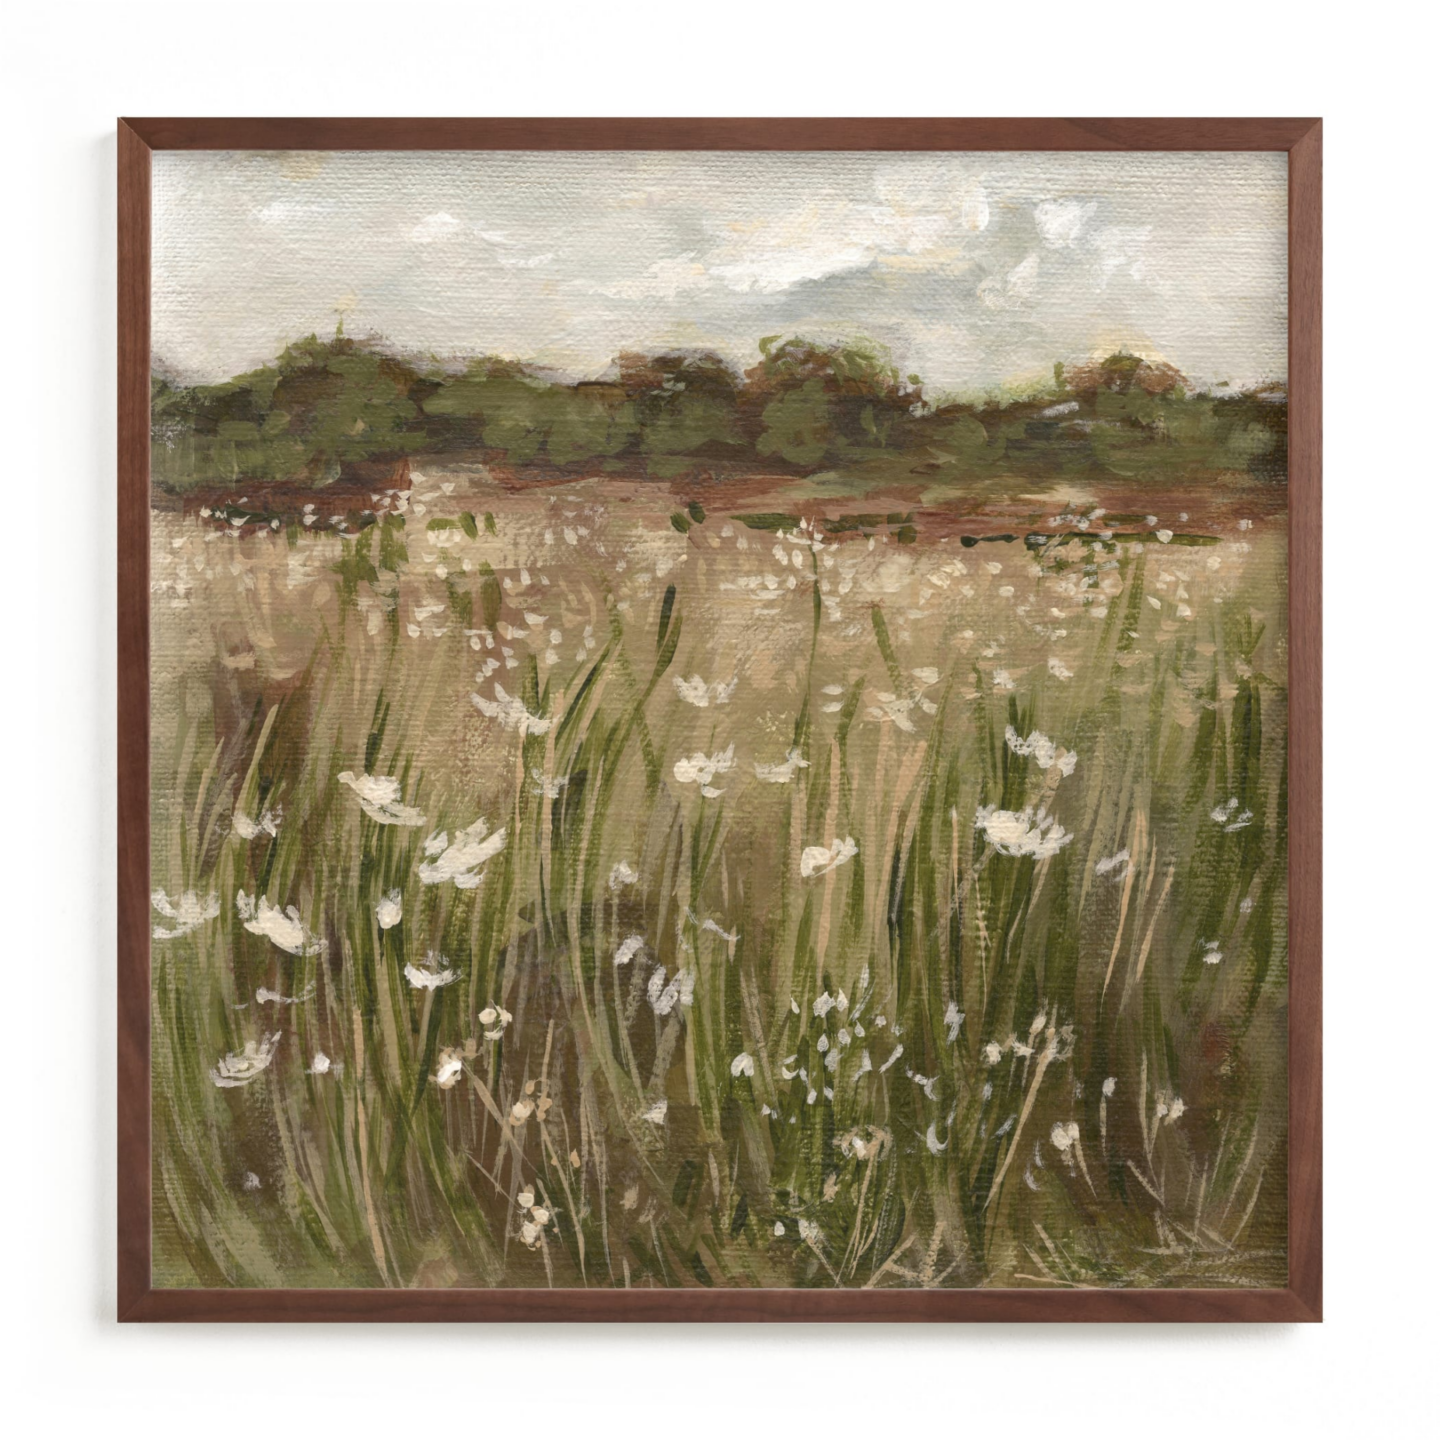 Field of Lace by Lorent and Leif, a fine art print available at Minted. #fineartprint